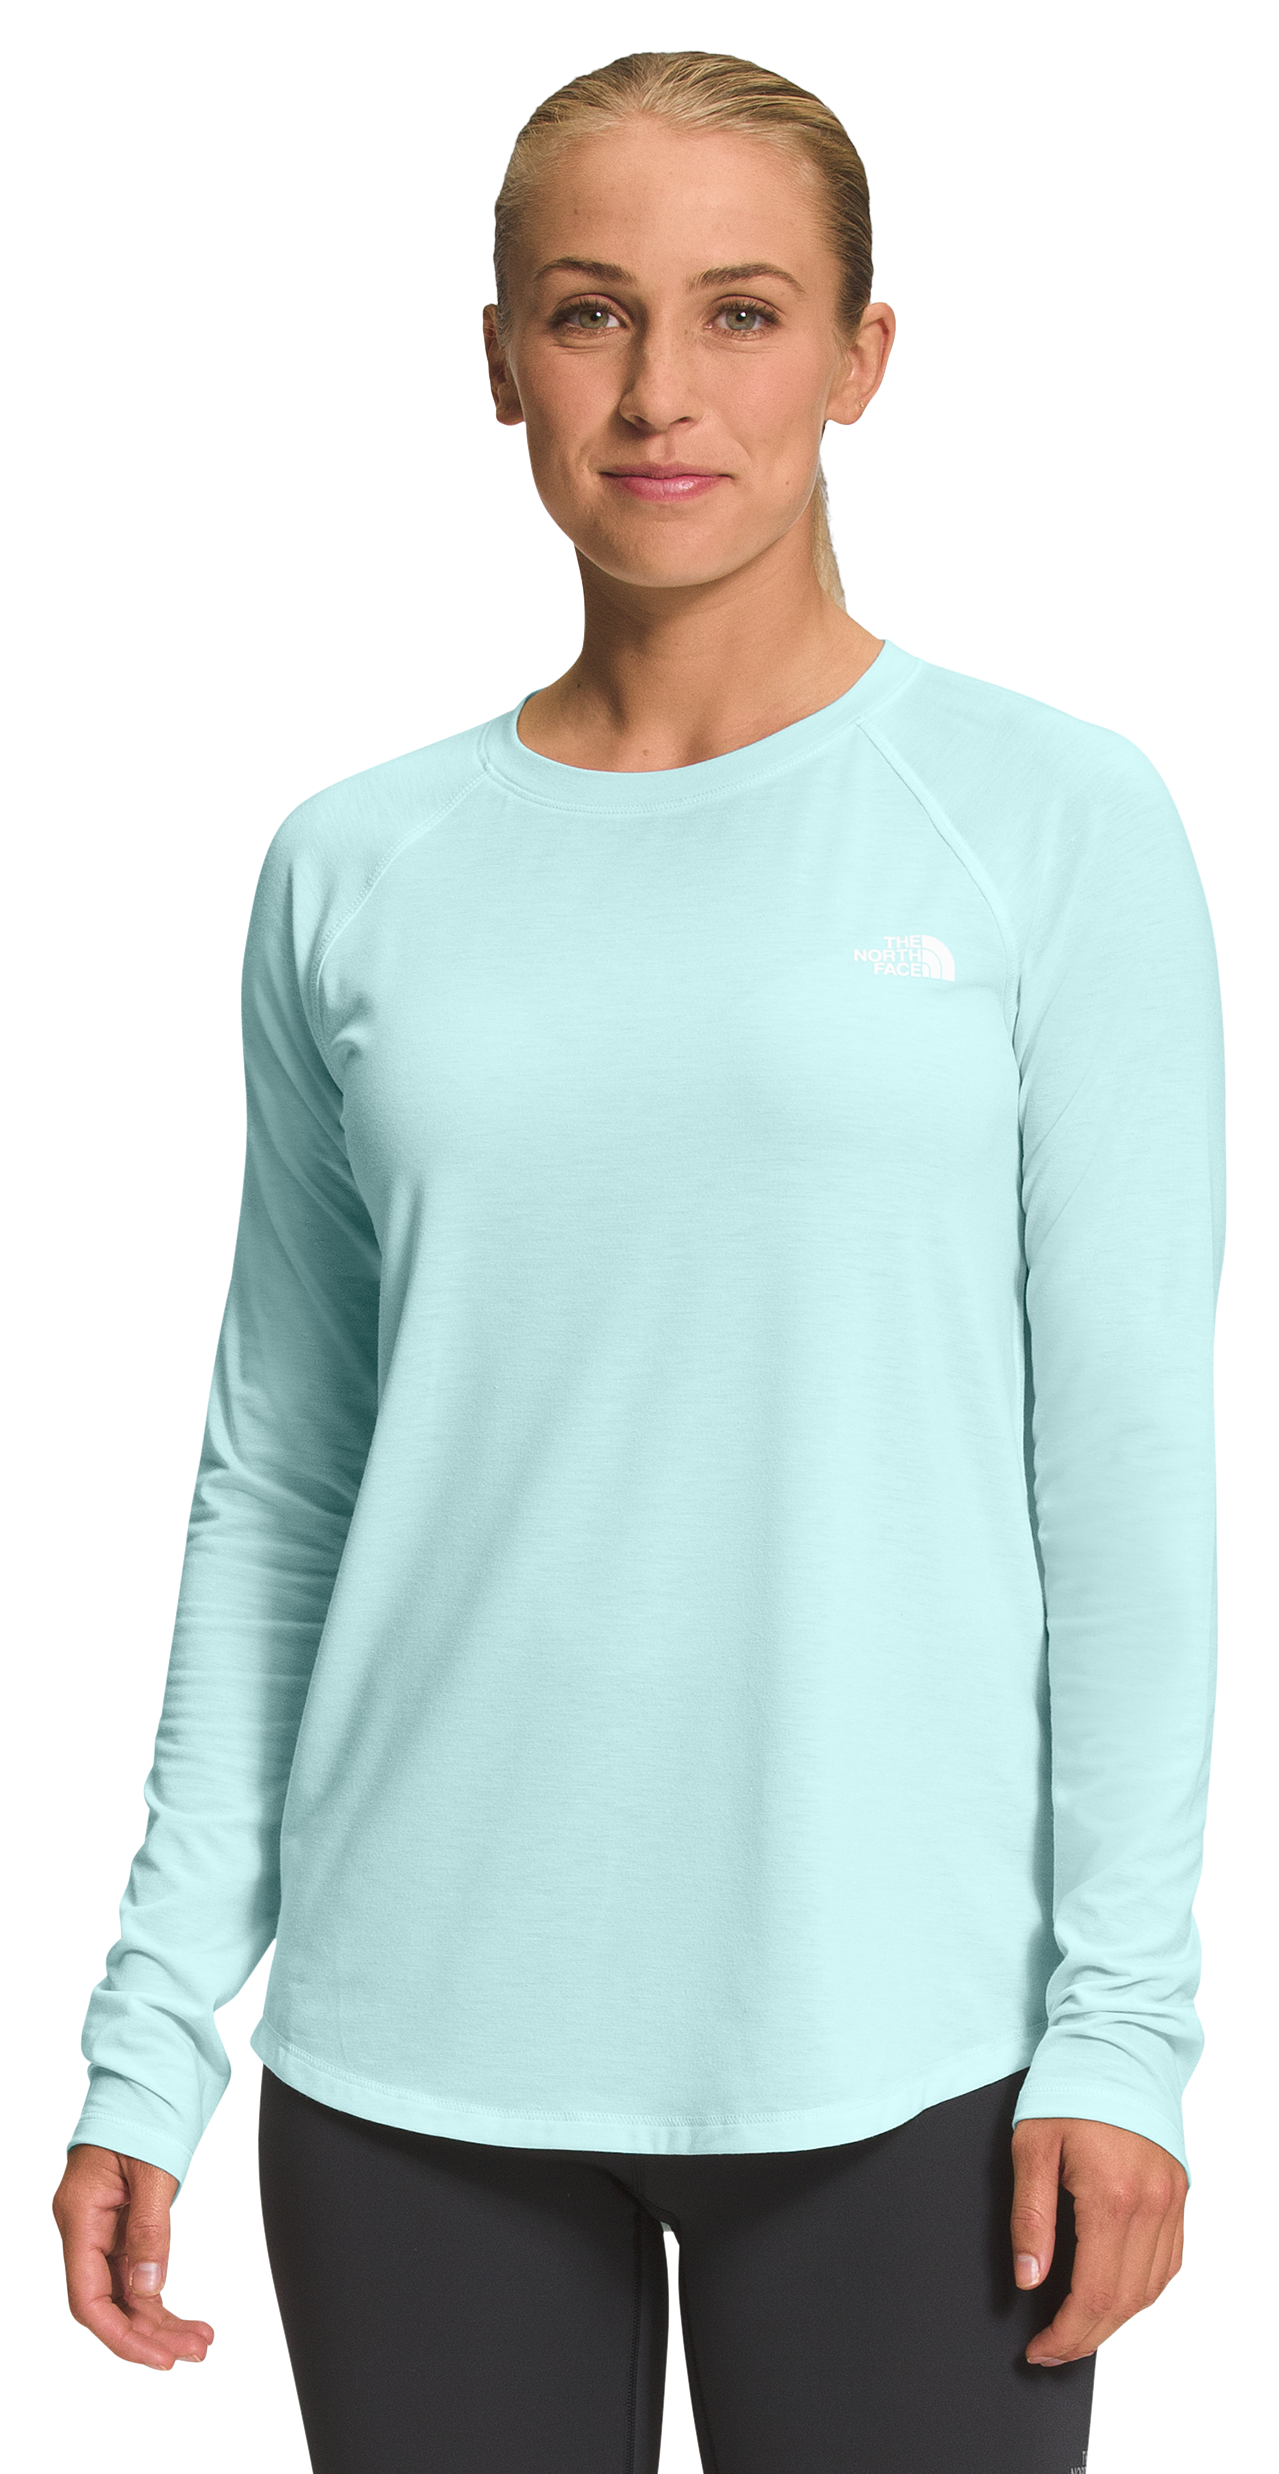 The North Face Wander Hi-Low Long-Sleeve Shirt for Ladies - Skylight Blue Heather - XL